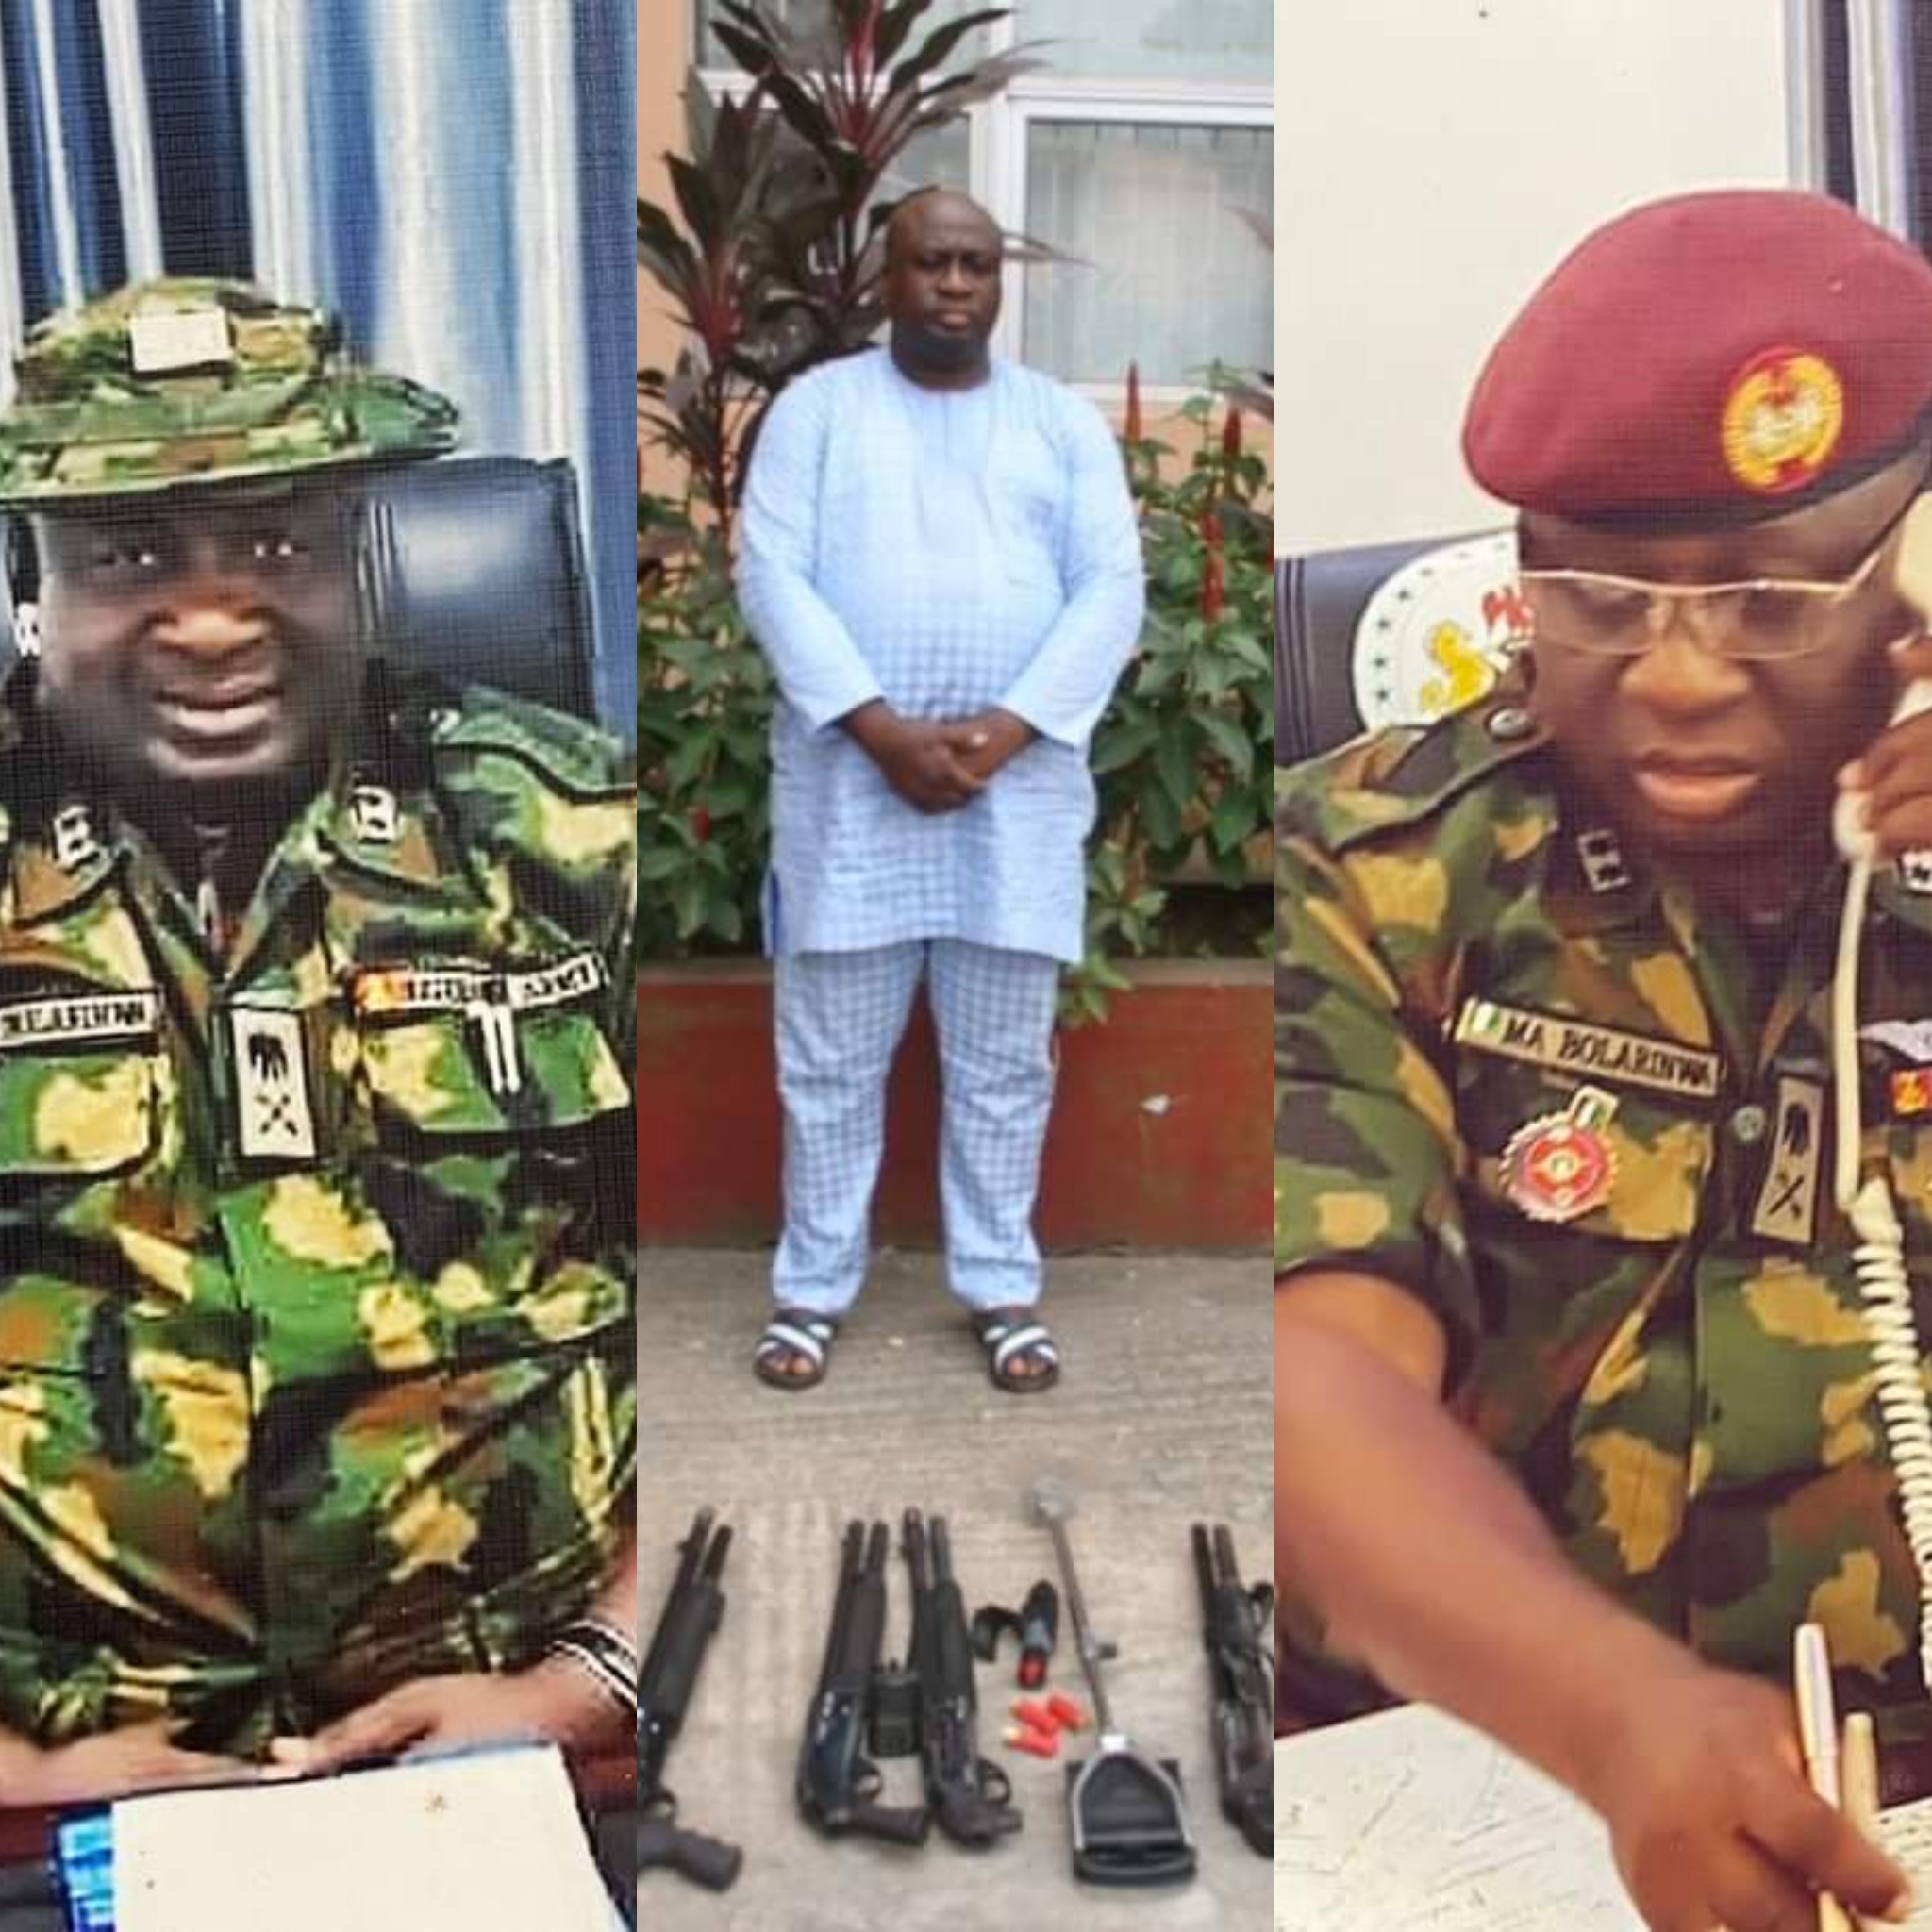 EFCC Arrests Fake Army General Who Claimed President Buhari Nominated Him As COAS For Alleged N270m Fraud (Photos)